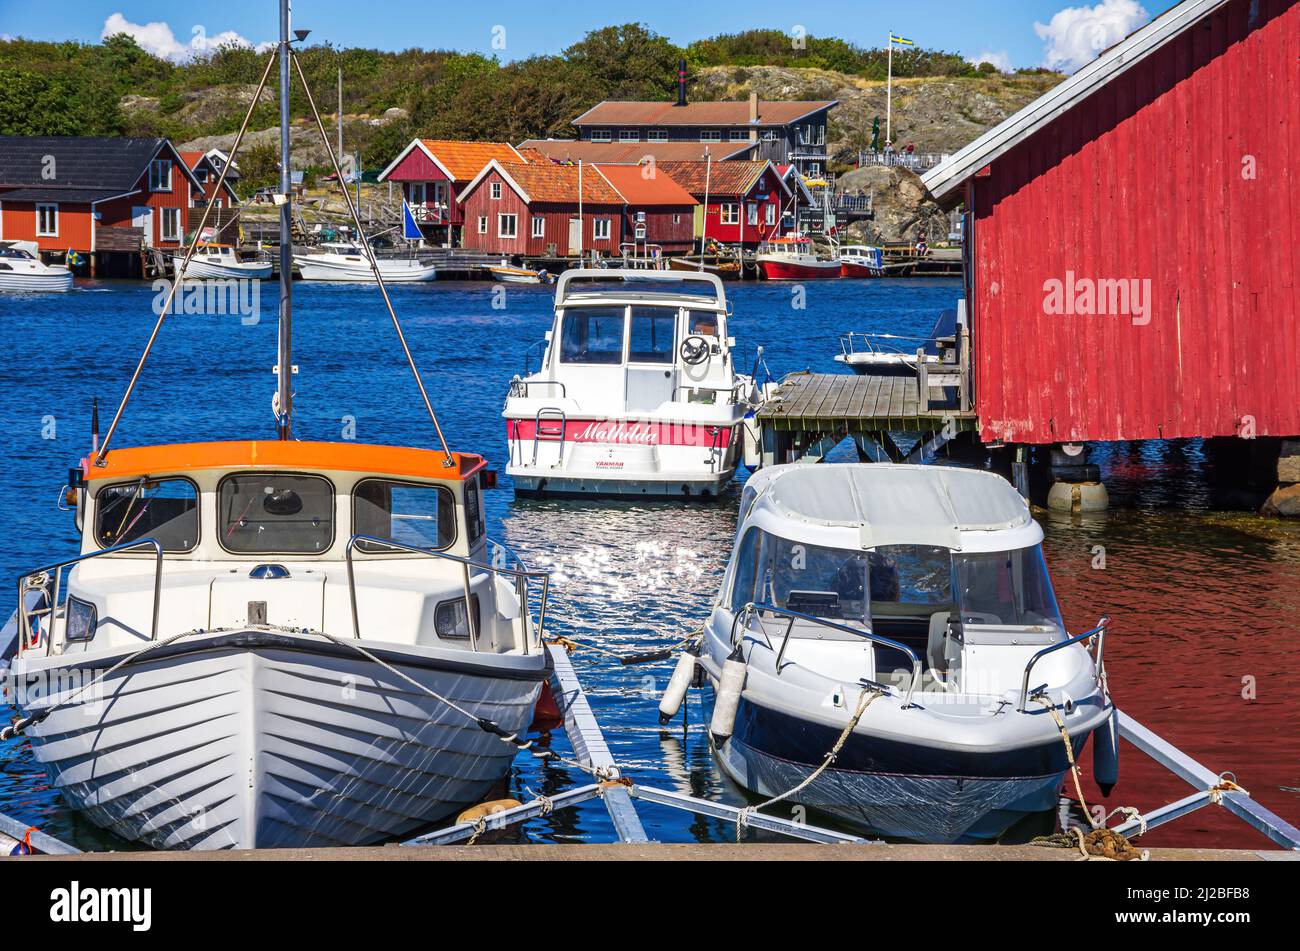 South Koster Island, Bohuslän, Västra Götalands län, Sweden: Jetty with boats and boat sheds in the picturesque village of Langegarde. Stock Photo